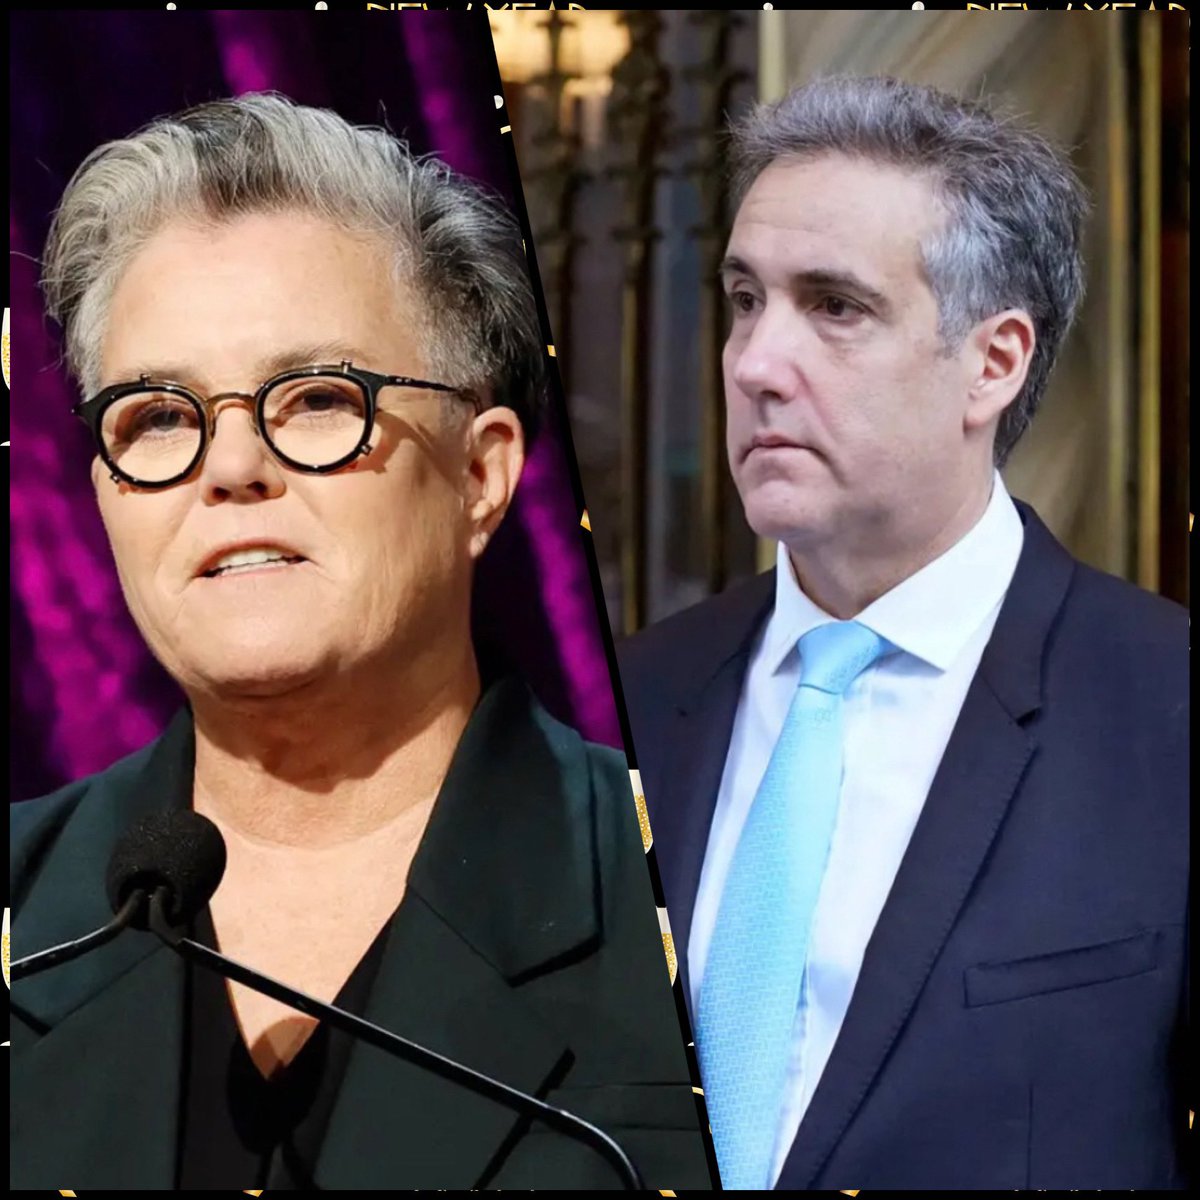 Michael Cohen and Rosie O’Donnell’s LOVE STORY 💋 Indeed, politics has a way of forging unexpected alliances and relationships. Yet, few connections seem as improbable and compelling as the intense bond of these two very STRANGE BEDFELLOWS that has developed between Rosie